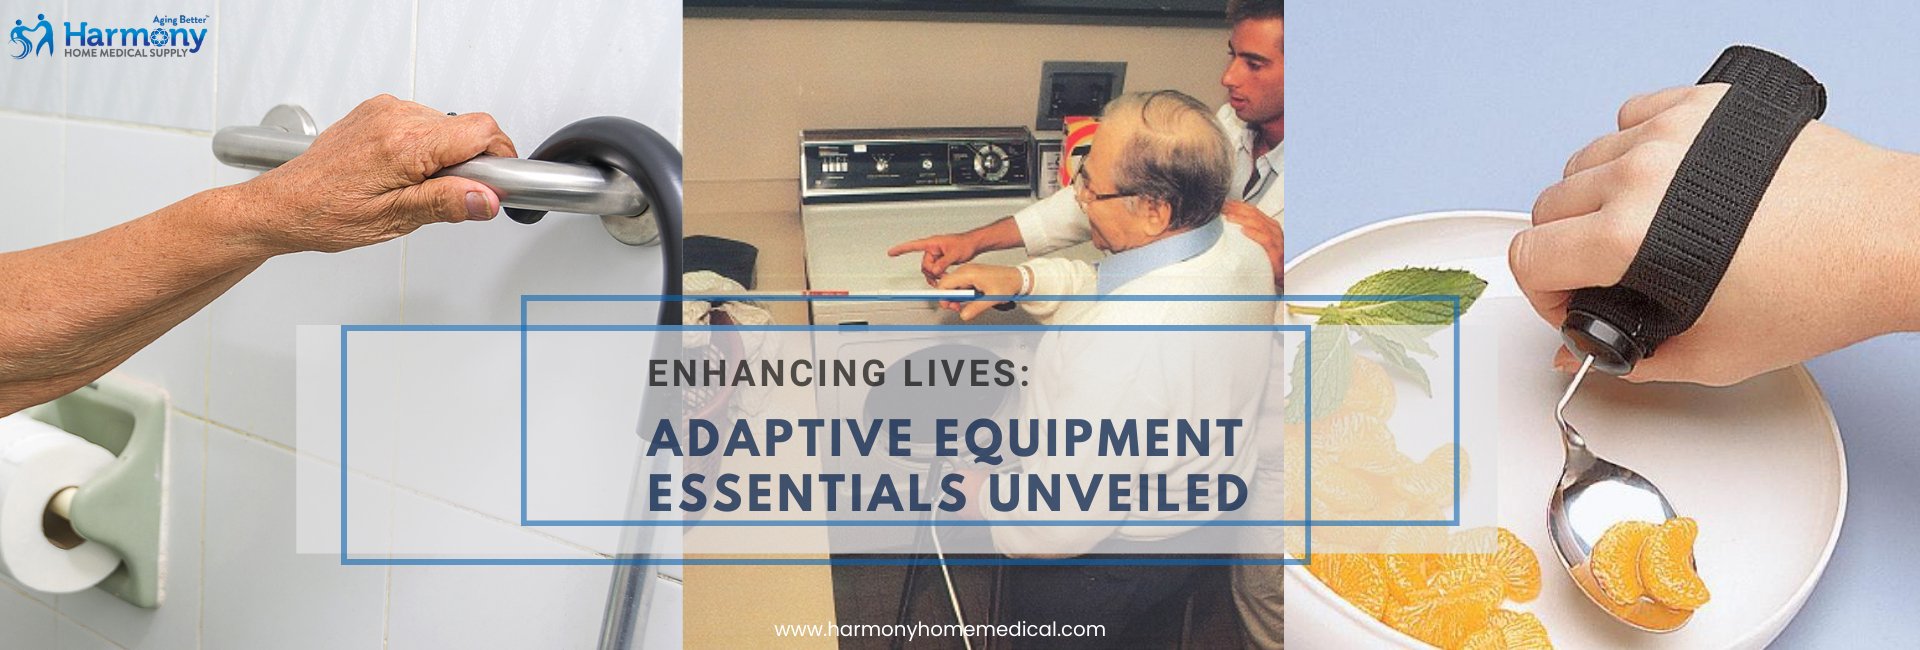 Adaptive Equipment: A Comprehensive Guide for Caregivers and Individuals